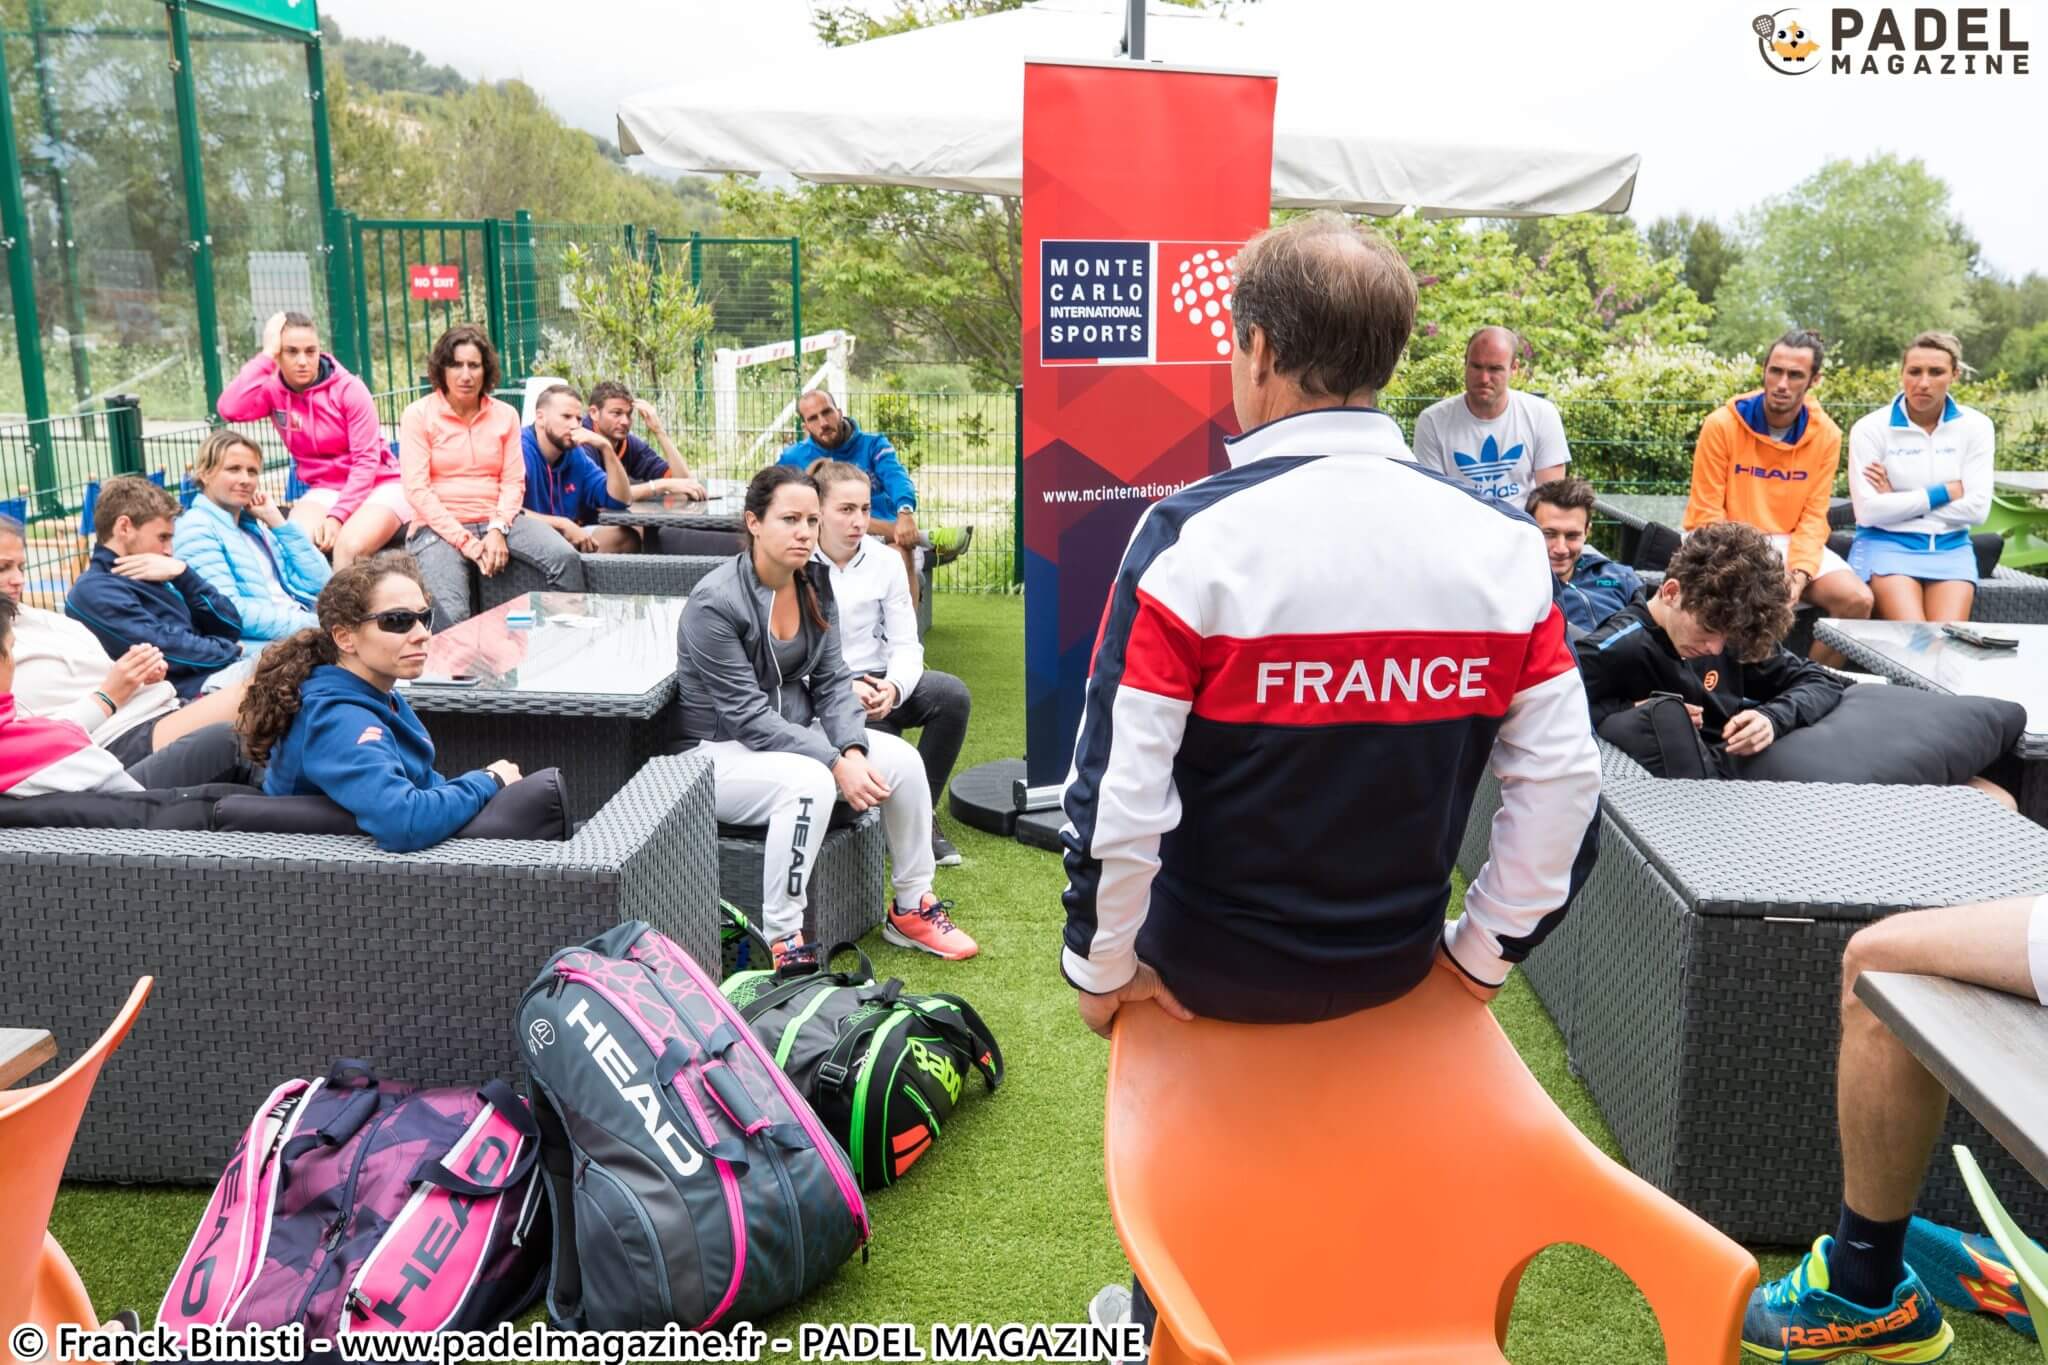 La Padel What is Nations Cup?